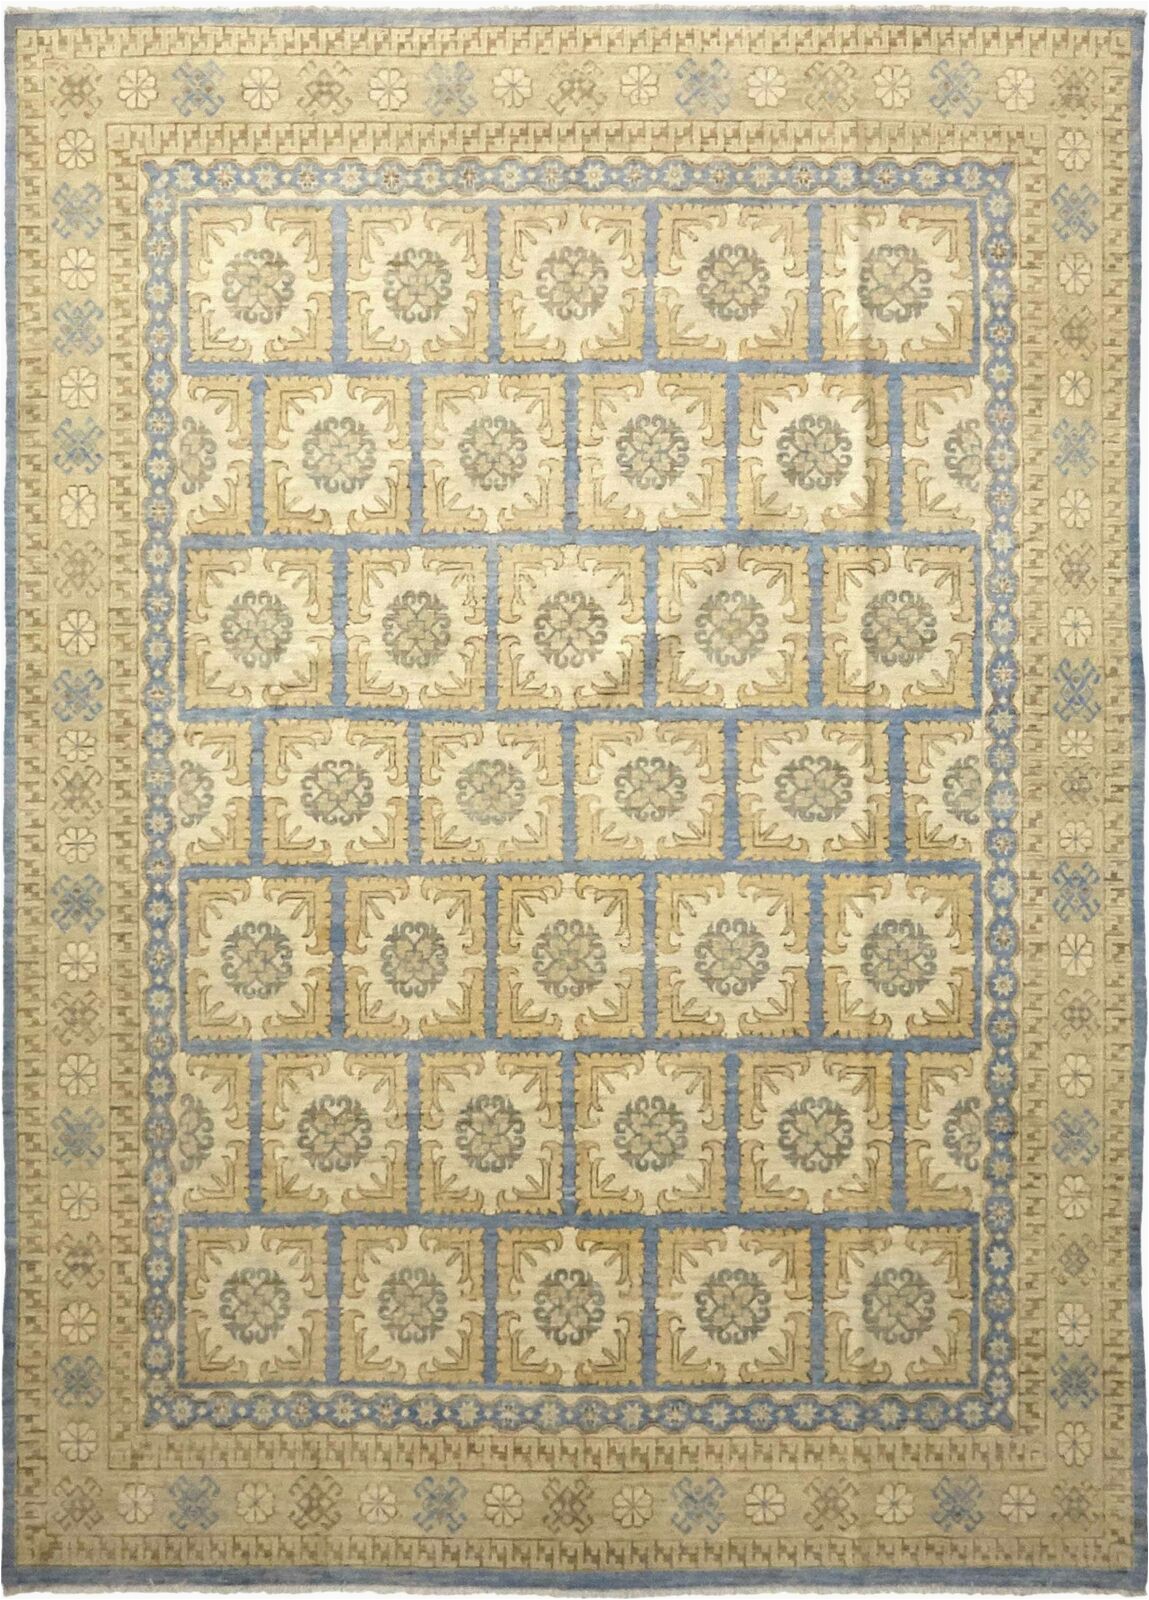 12 Ft by 12 Ft area Rugs solo Rugs Khotan Hand Knotted area Rug In Hazelnut Wool 9 X 12 Ft